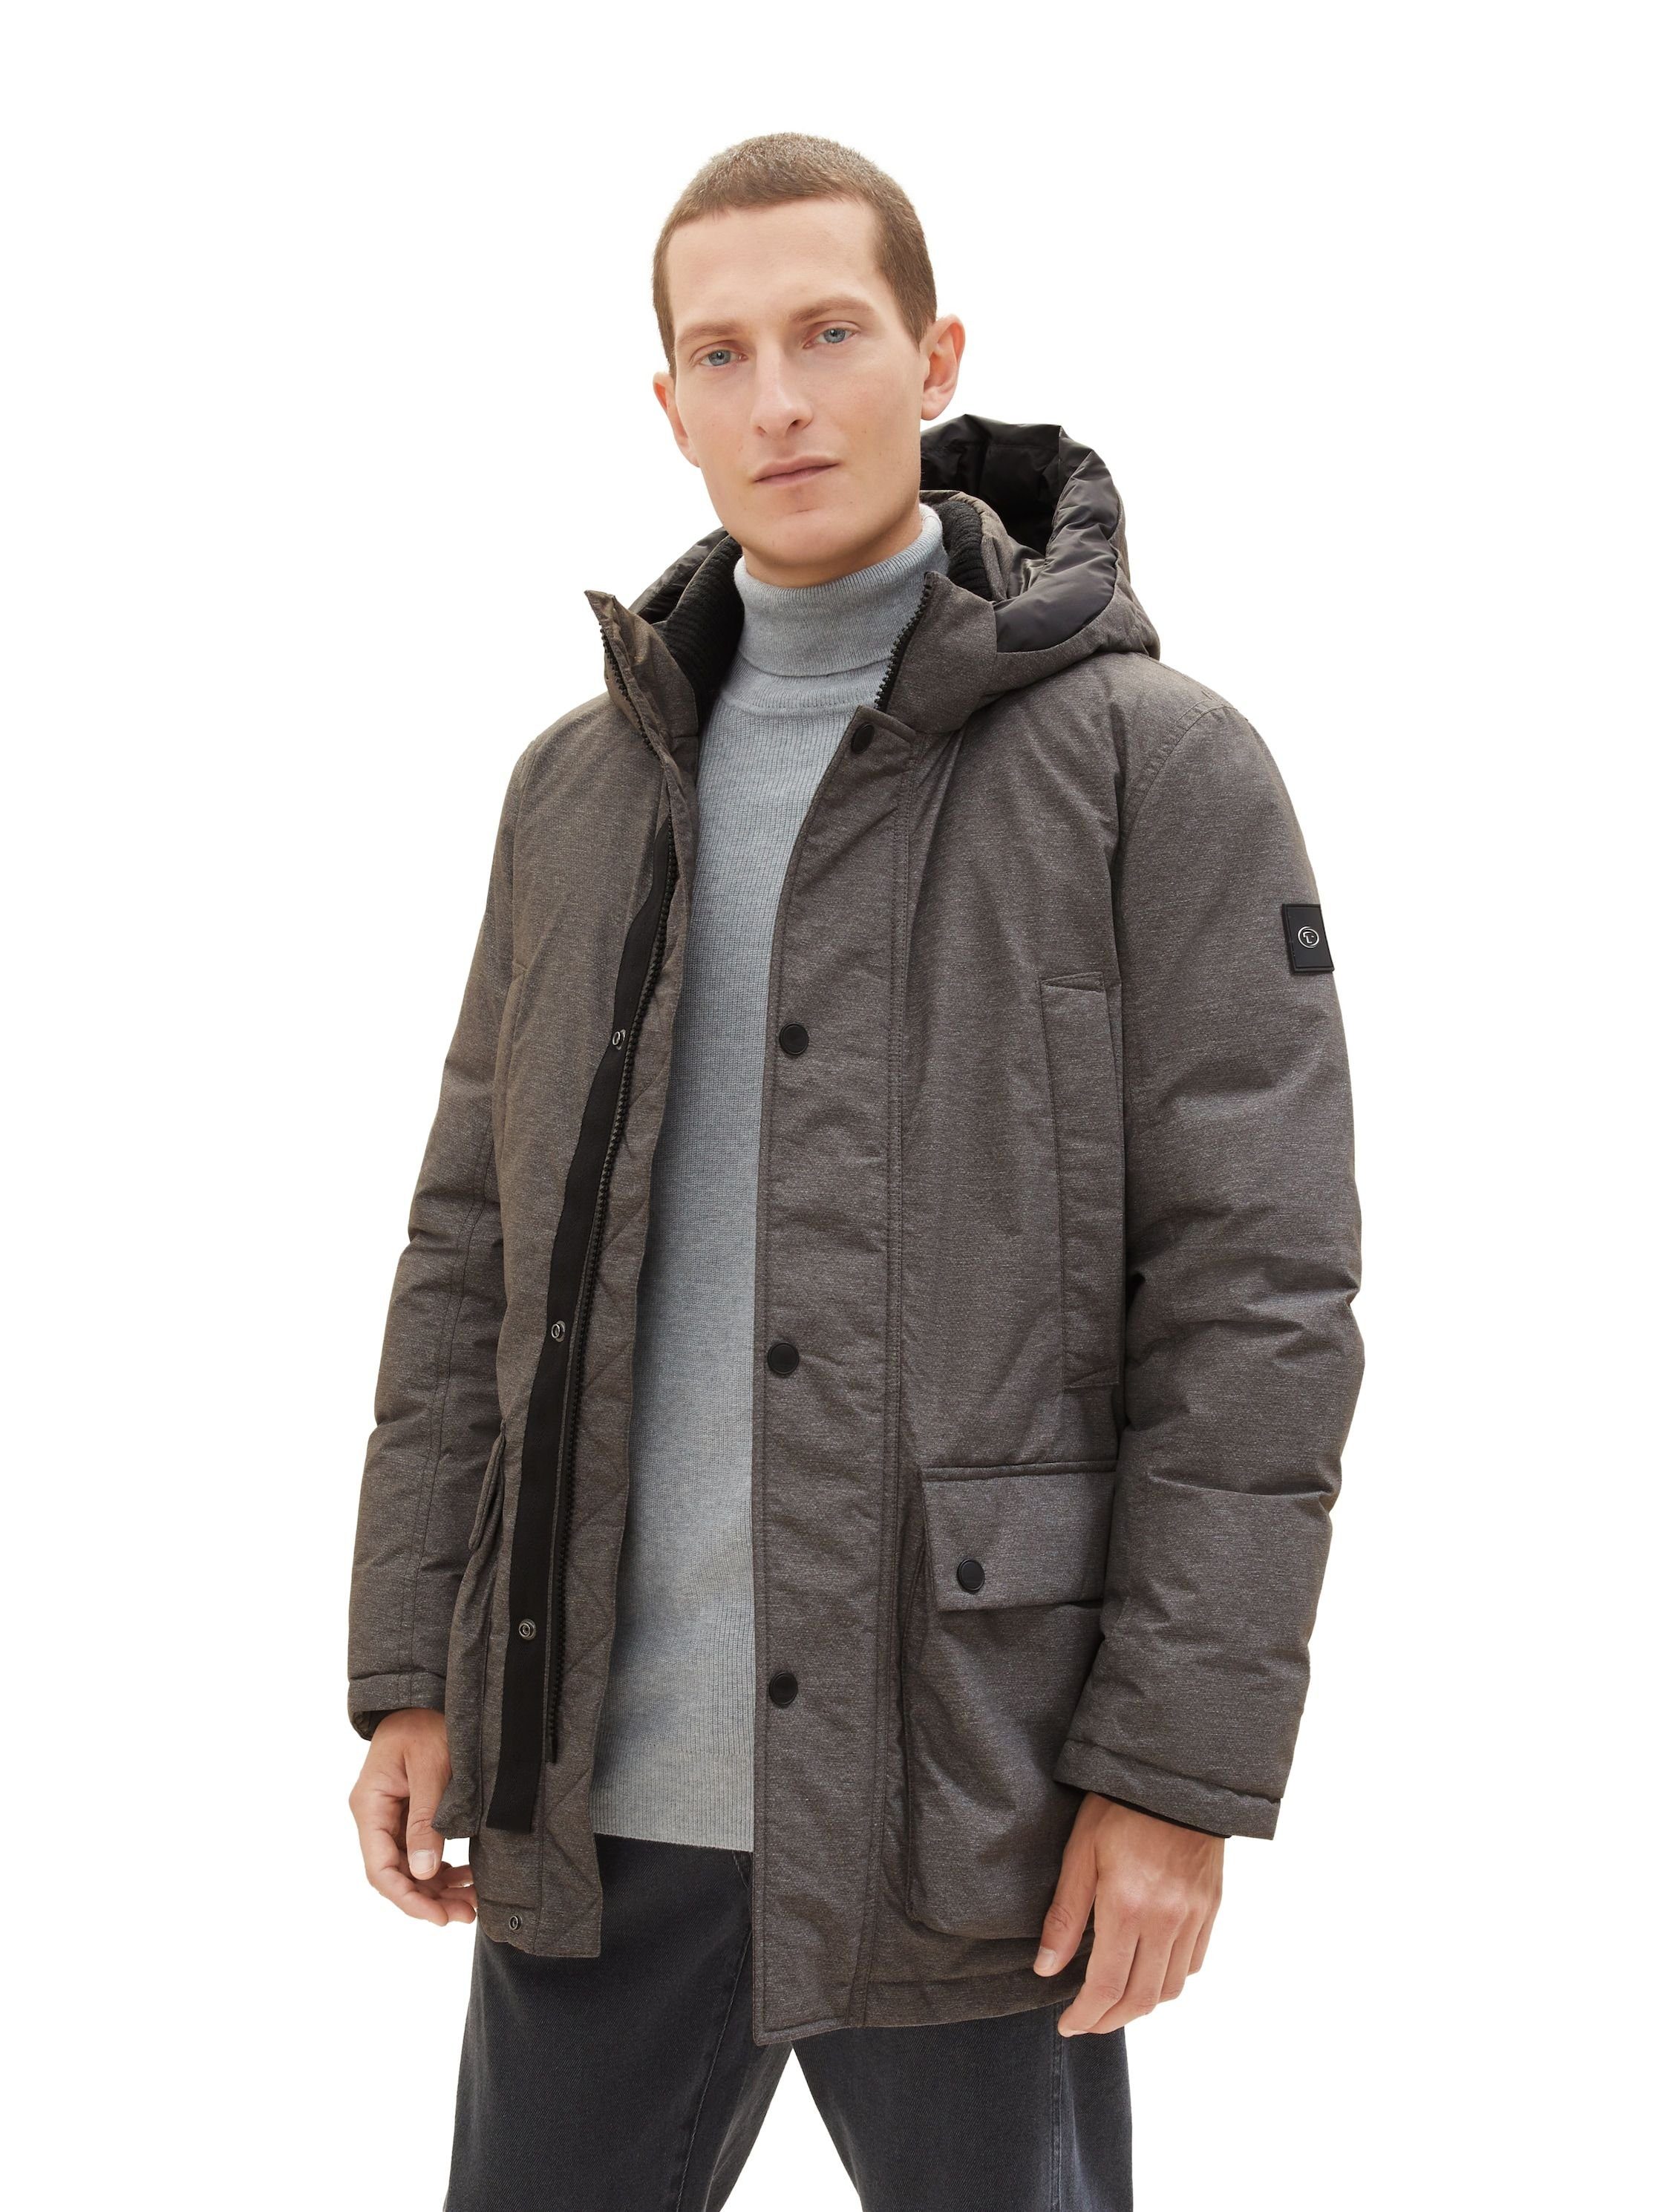 TAILOR grey structure Outdoorjacke TOM puffer